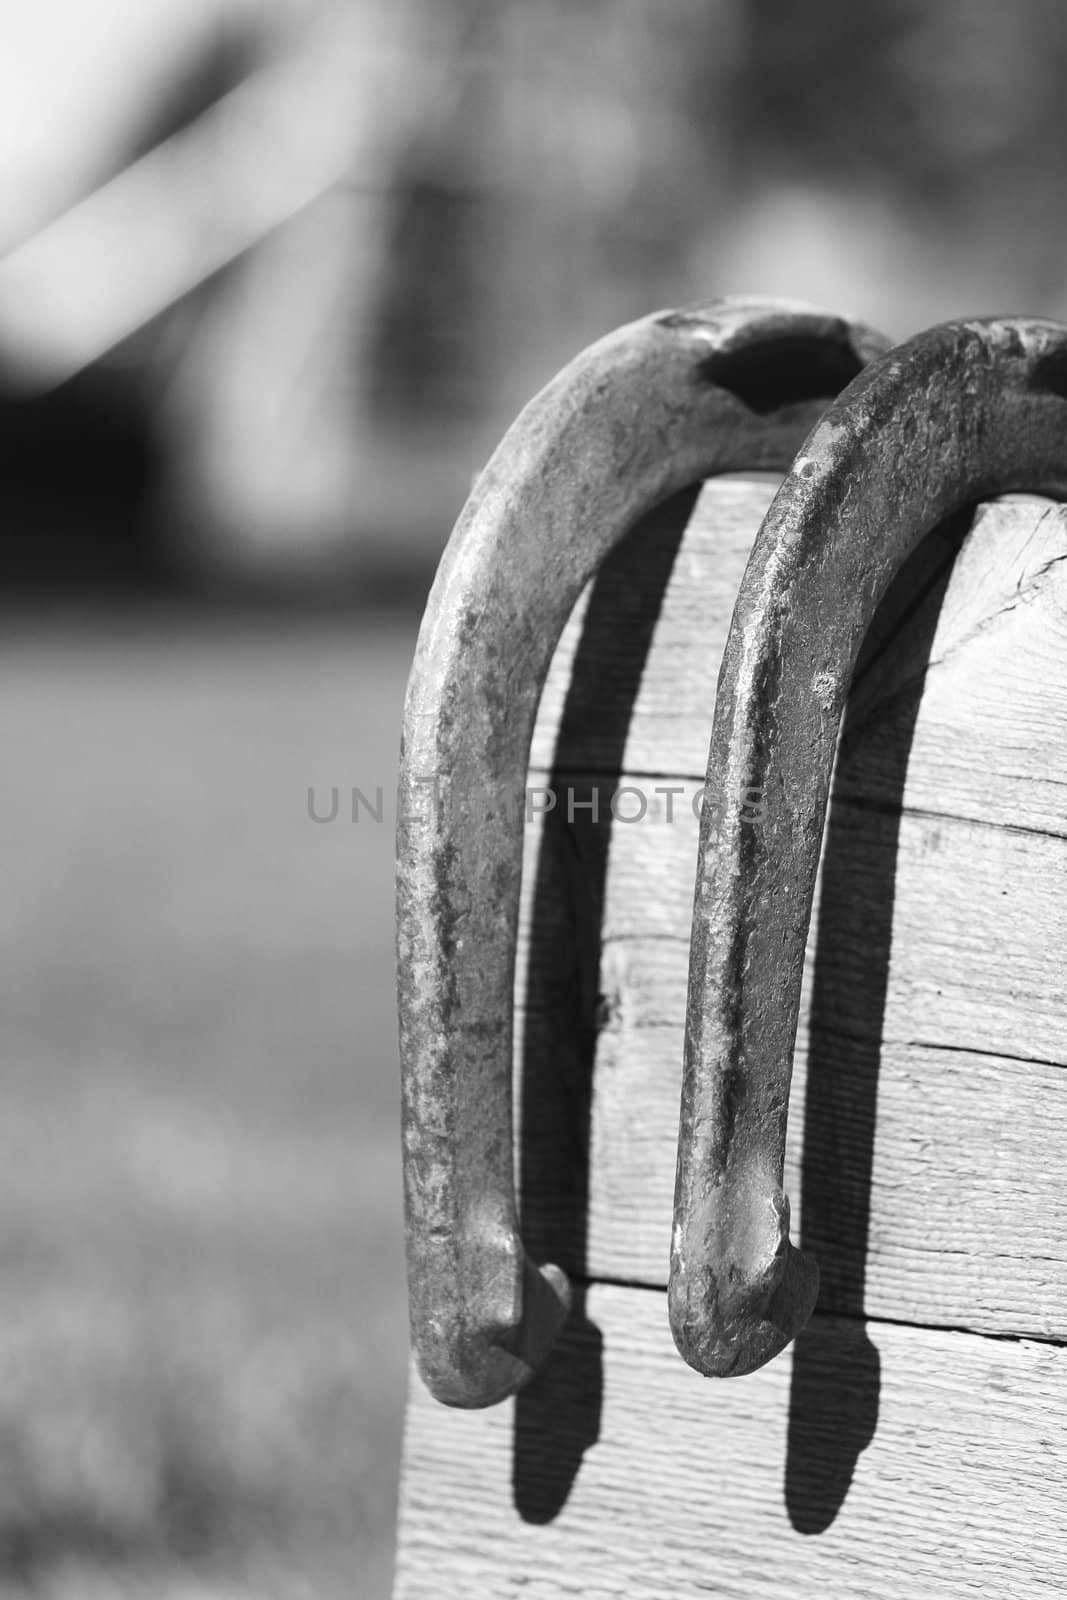 Horseshoes hanging on an old board in black and white